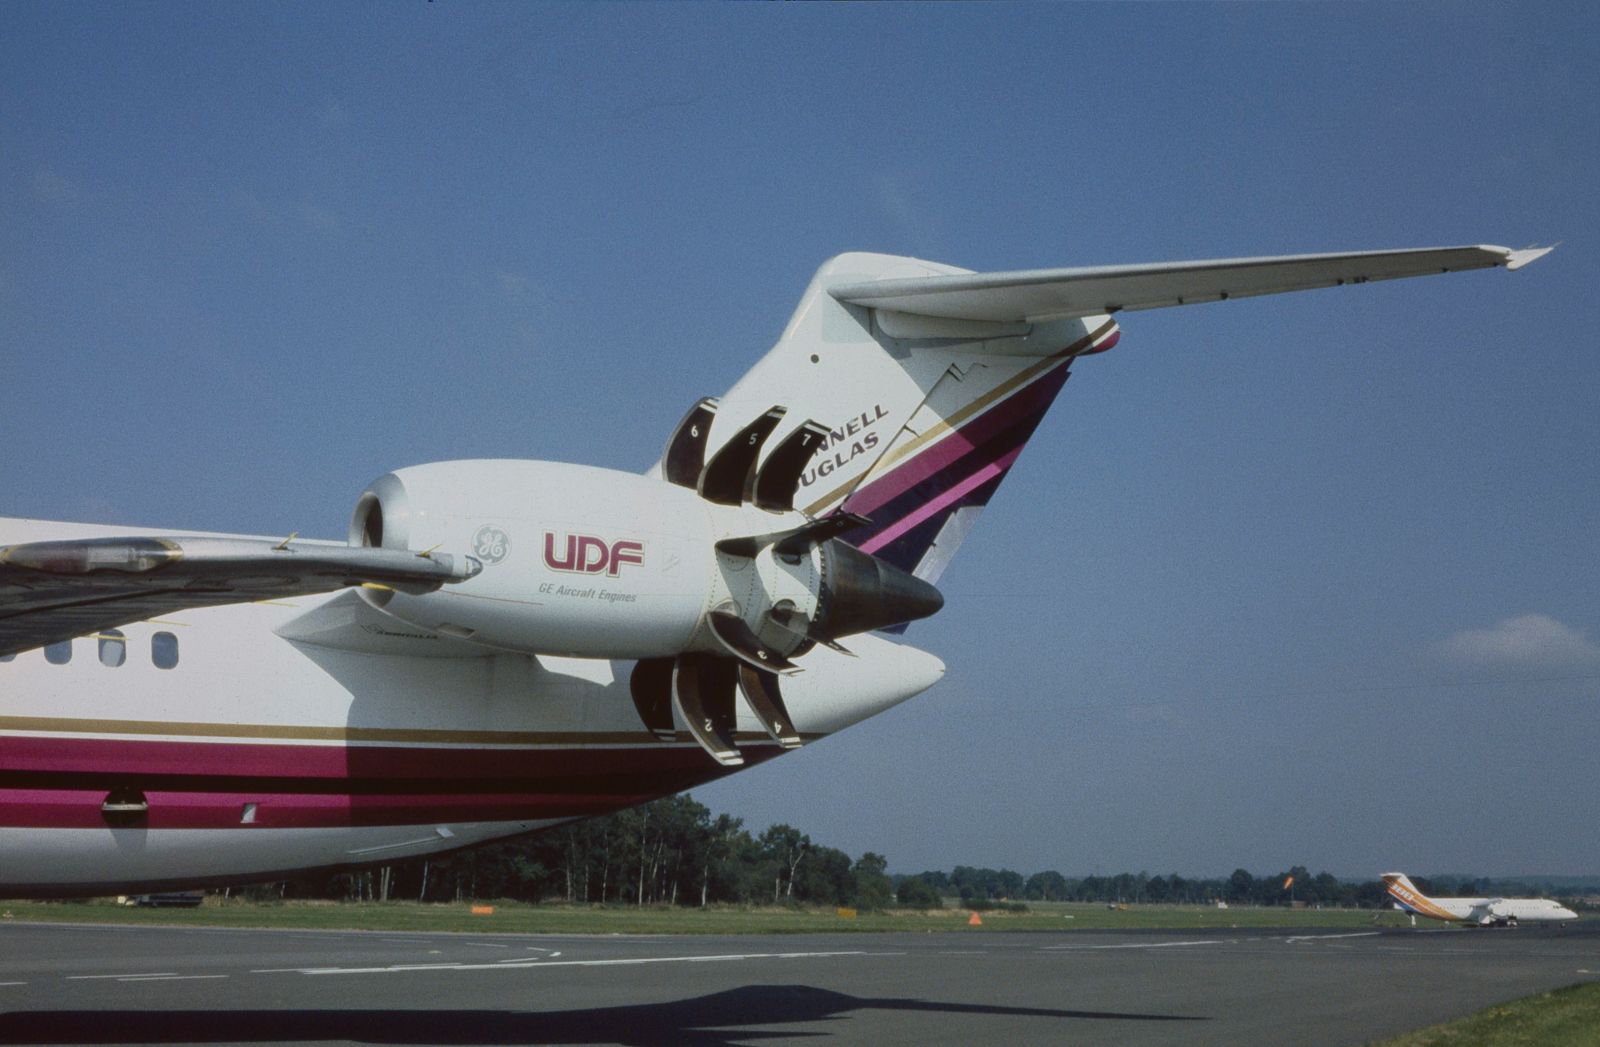 The GE36 UDF prototype installed on the same MD-80 testbed